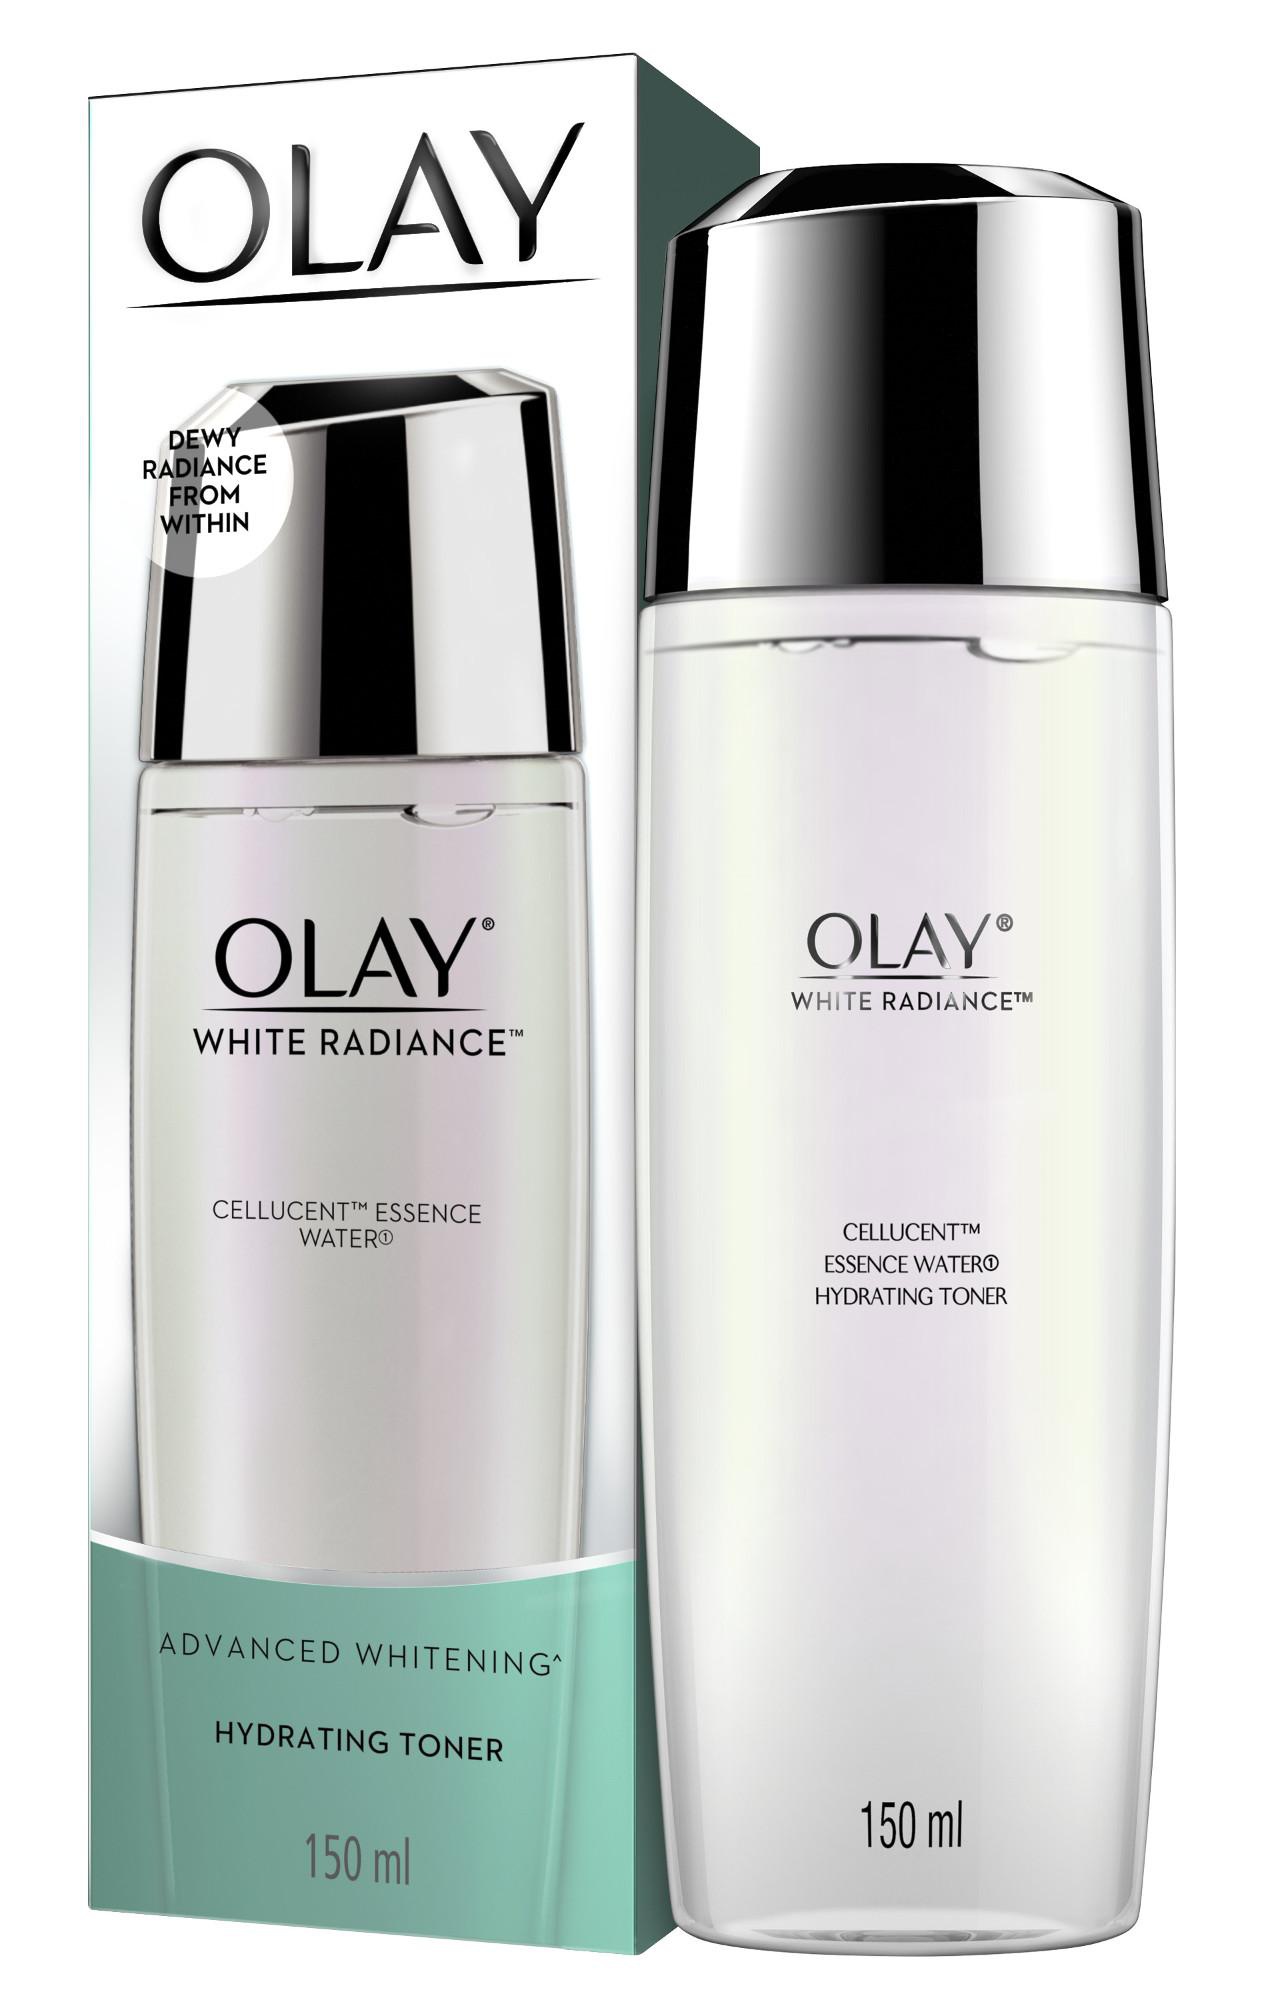 Olay White Radiance CelLucent Essence Water